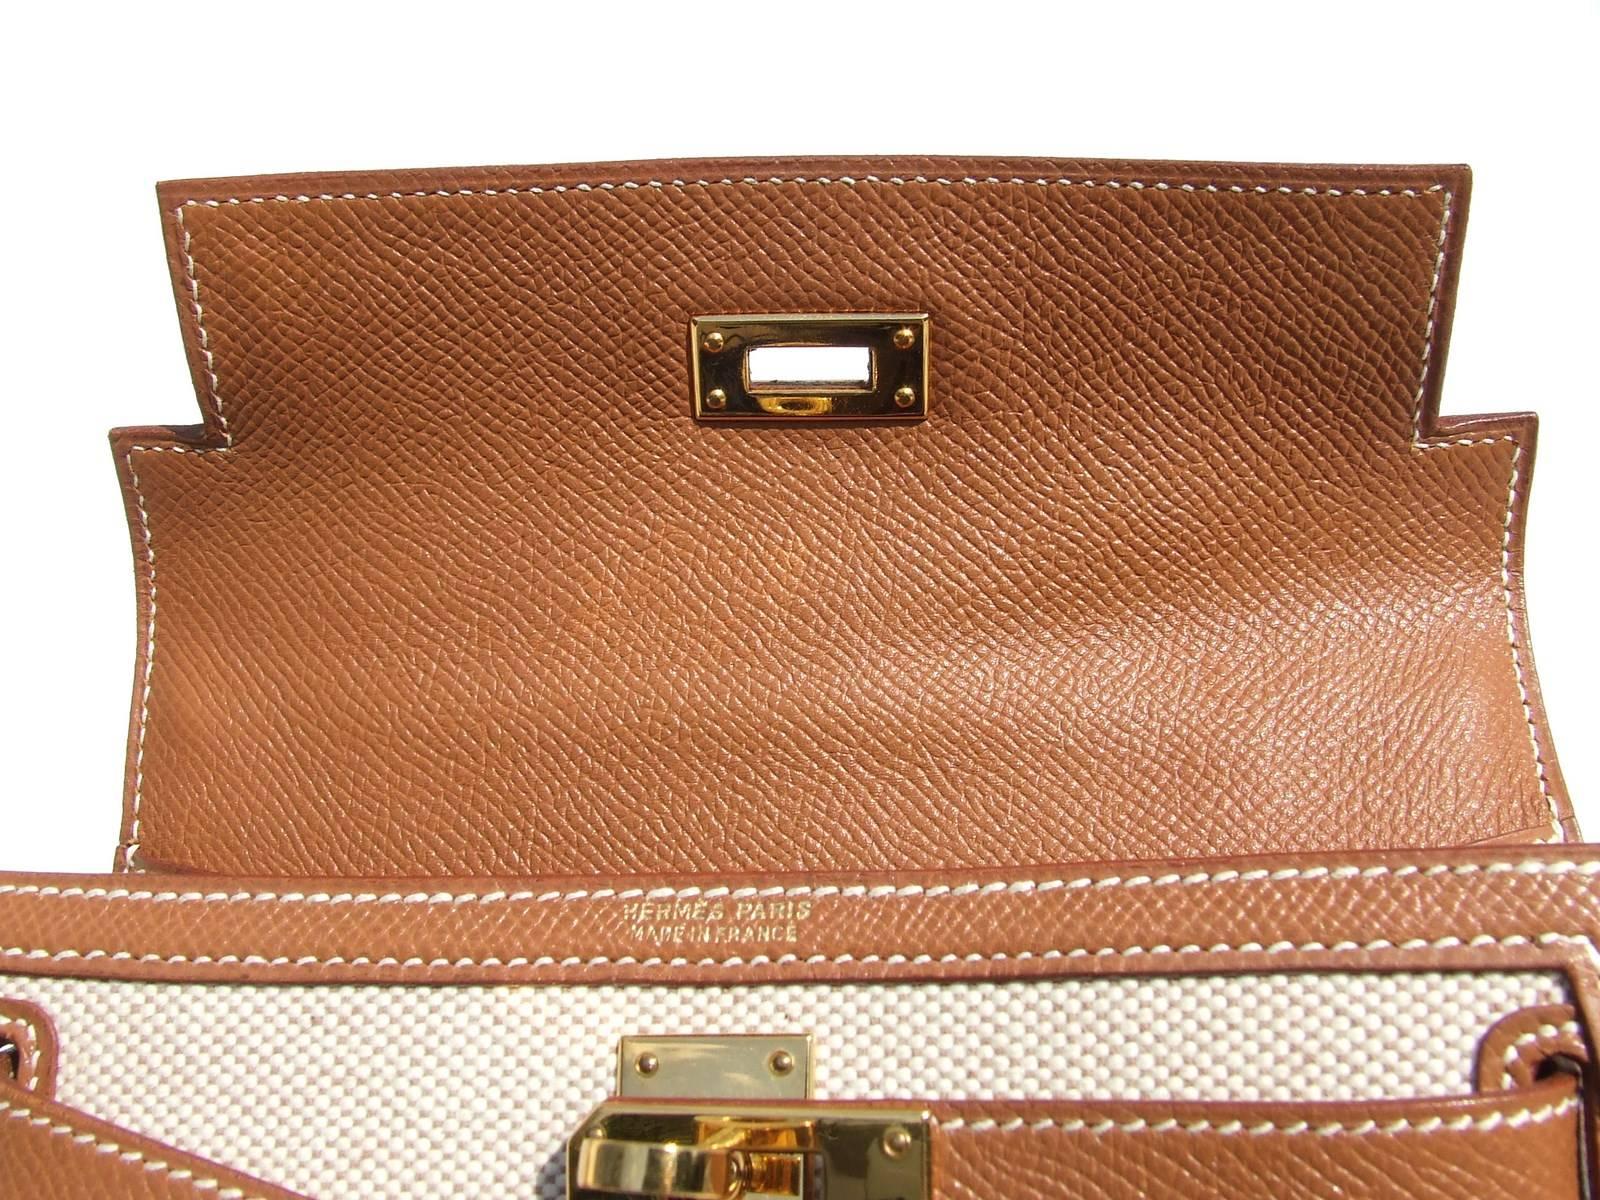 Brown Extremely RARE HERMES Mini Kelly 20 cm Sellier Bag Canvas Gold Leather GHW